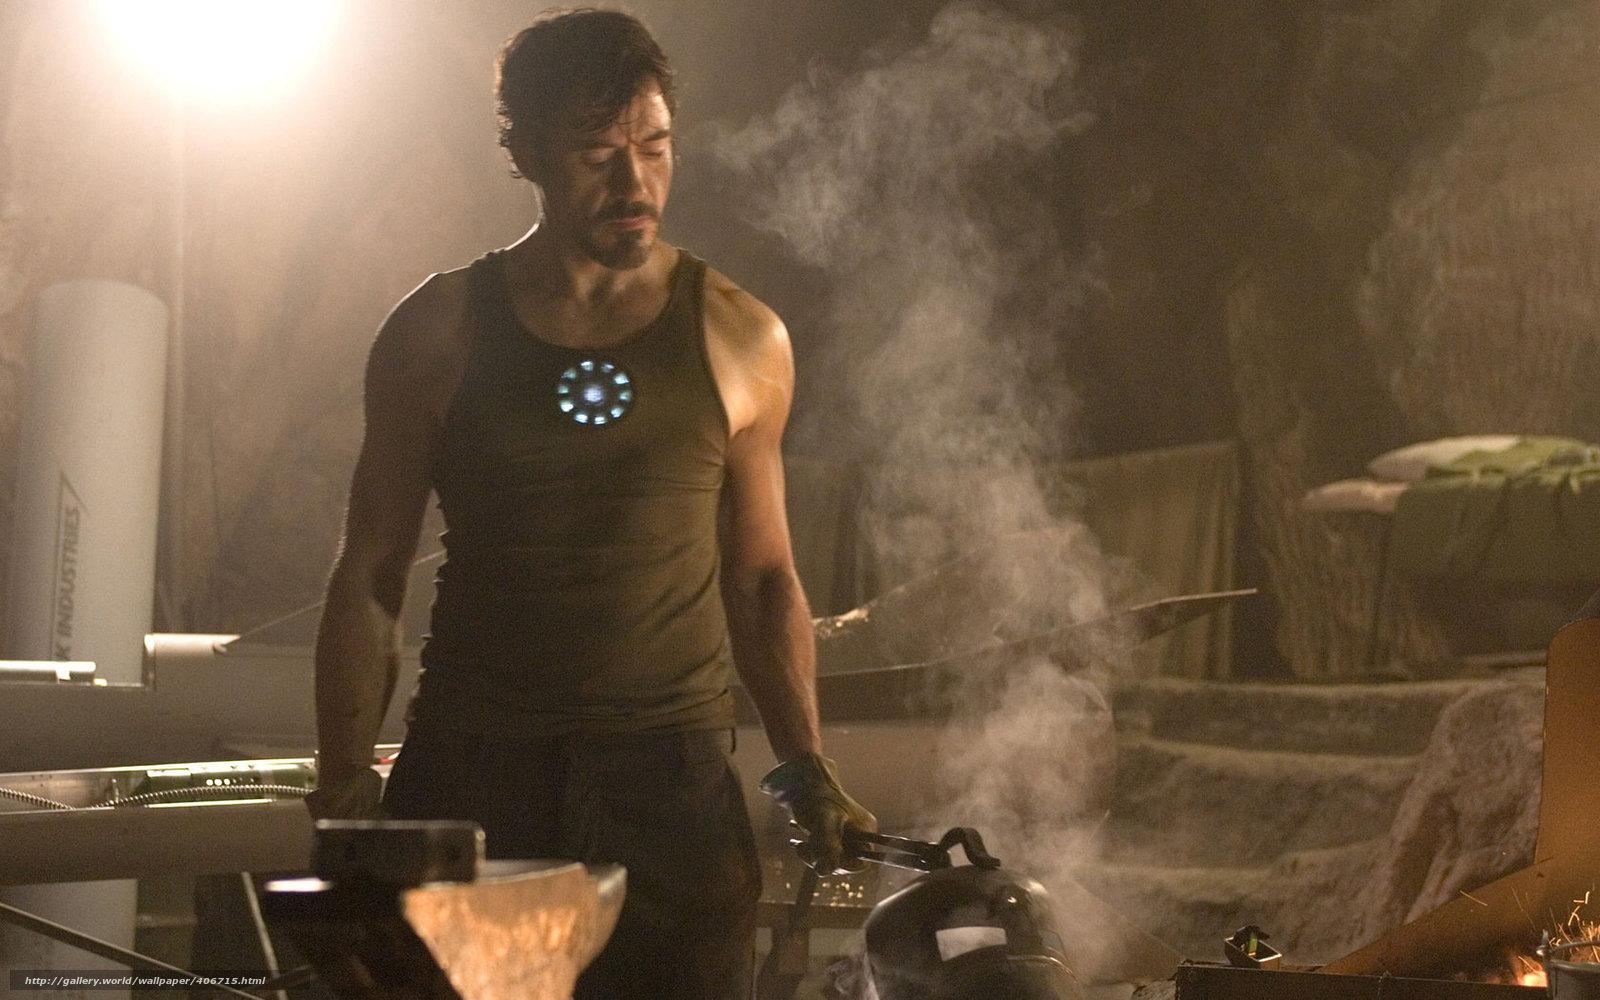 A Brilliant Fan Theory Connects Tony Stark And His Arc Reactor To An Infinity Stone | Best Of Comic Books